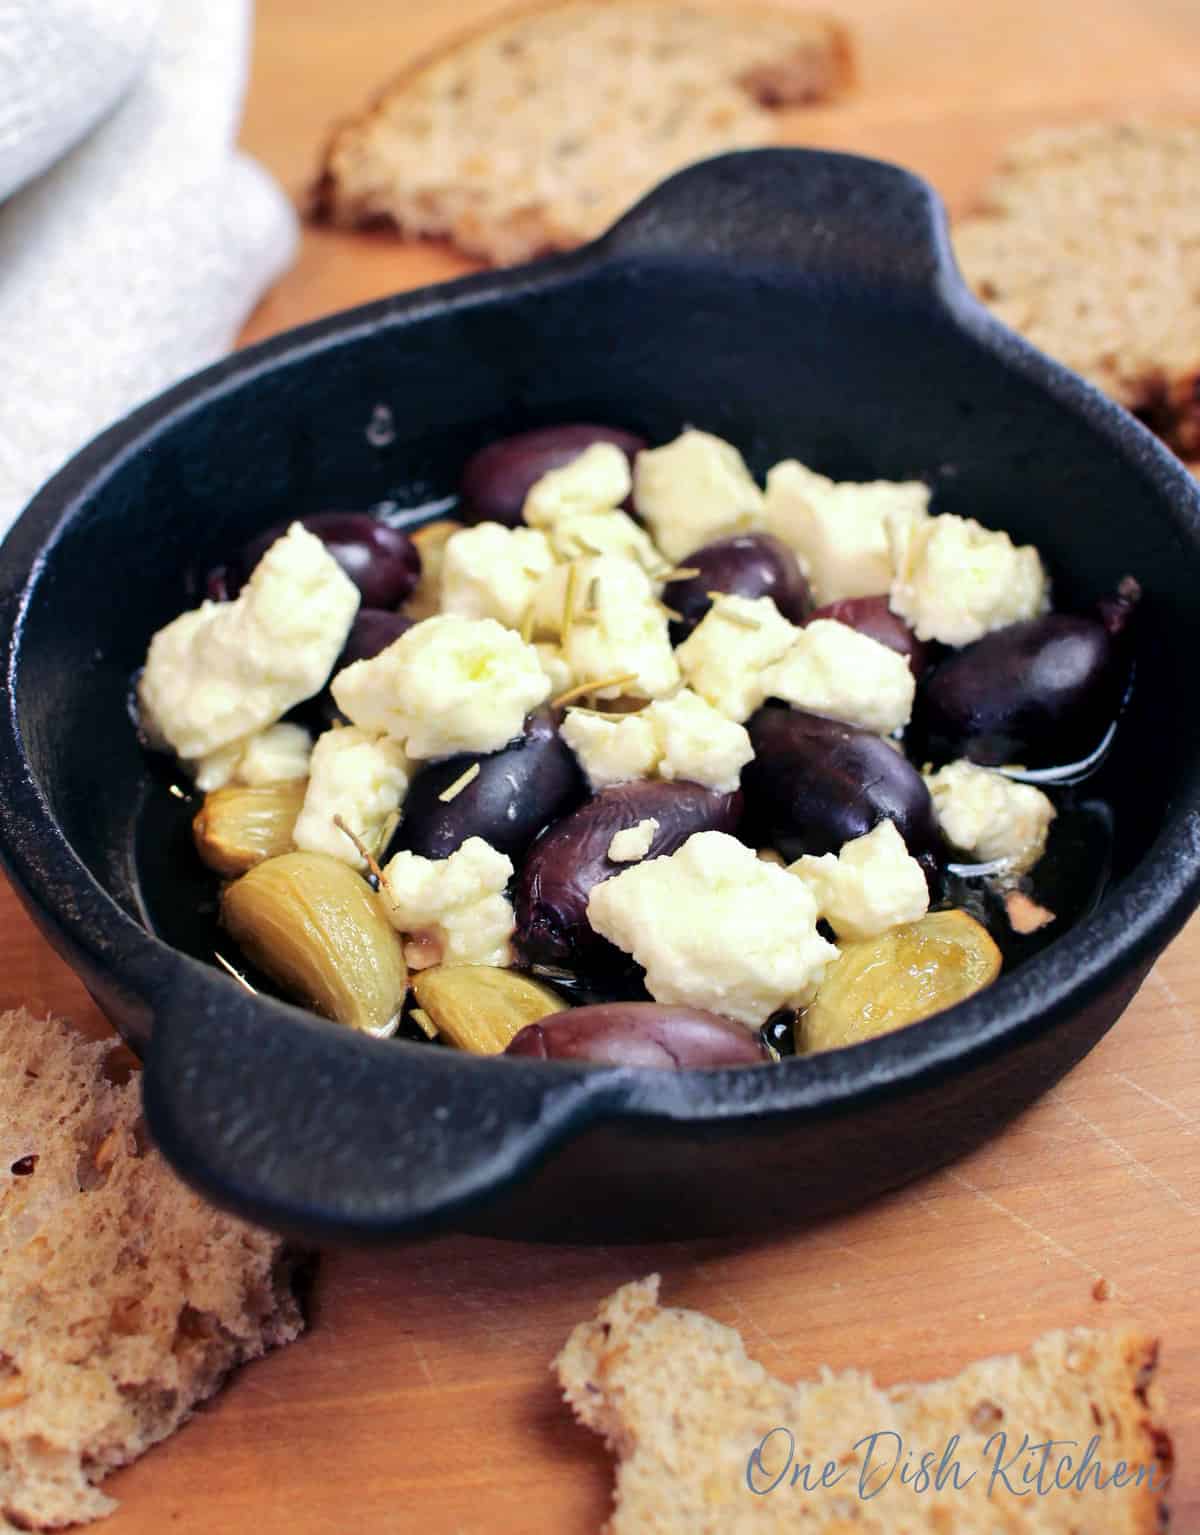 a small baking dish filled with roasted garlic, olives, and feta cheese next to torn pieces of bread.